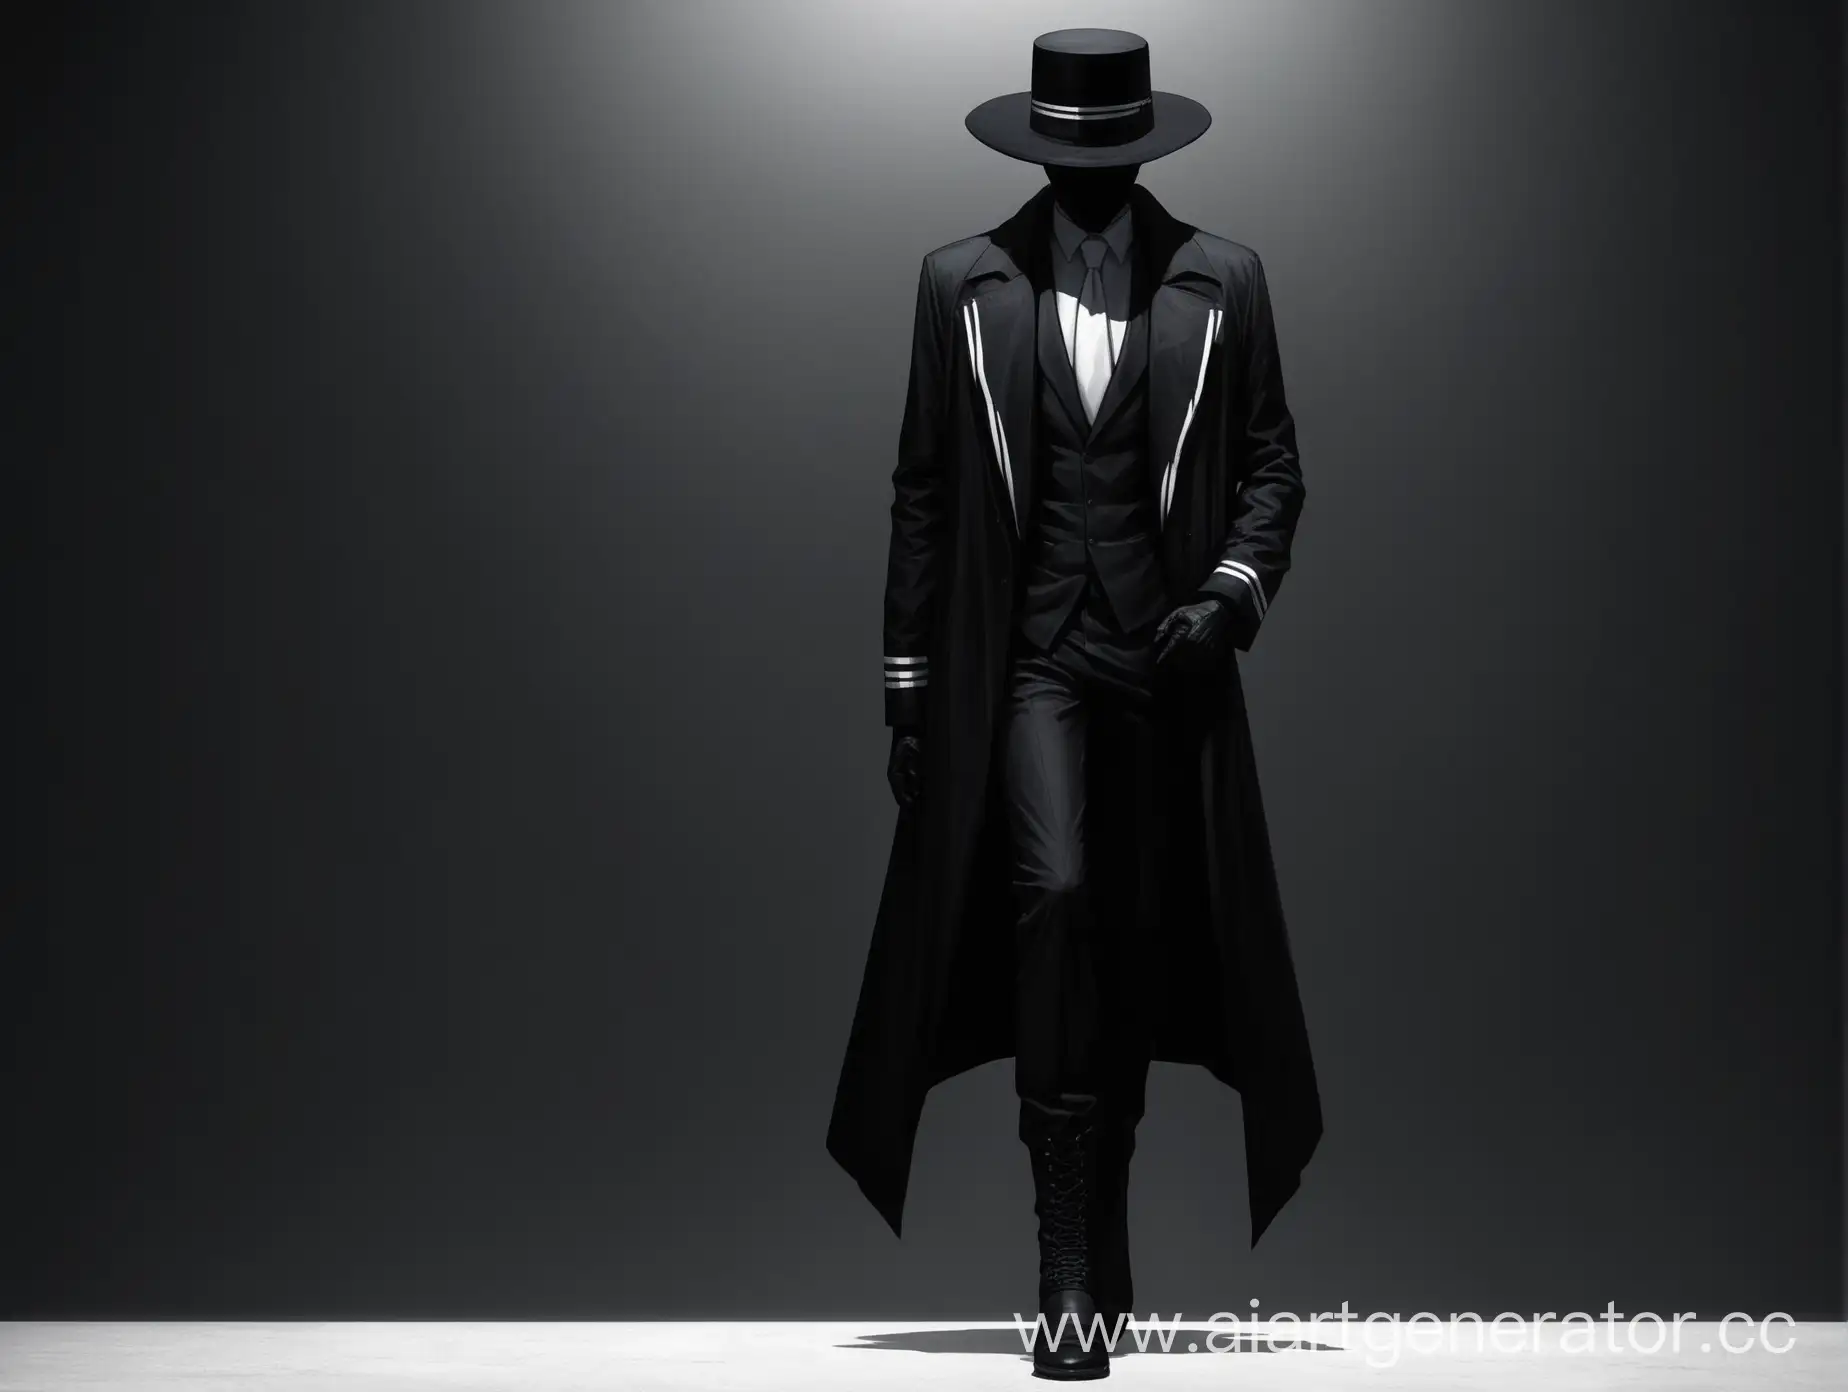 Mysterious-Man-in-Black-Ensemble-with-Striking-White-Accents